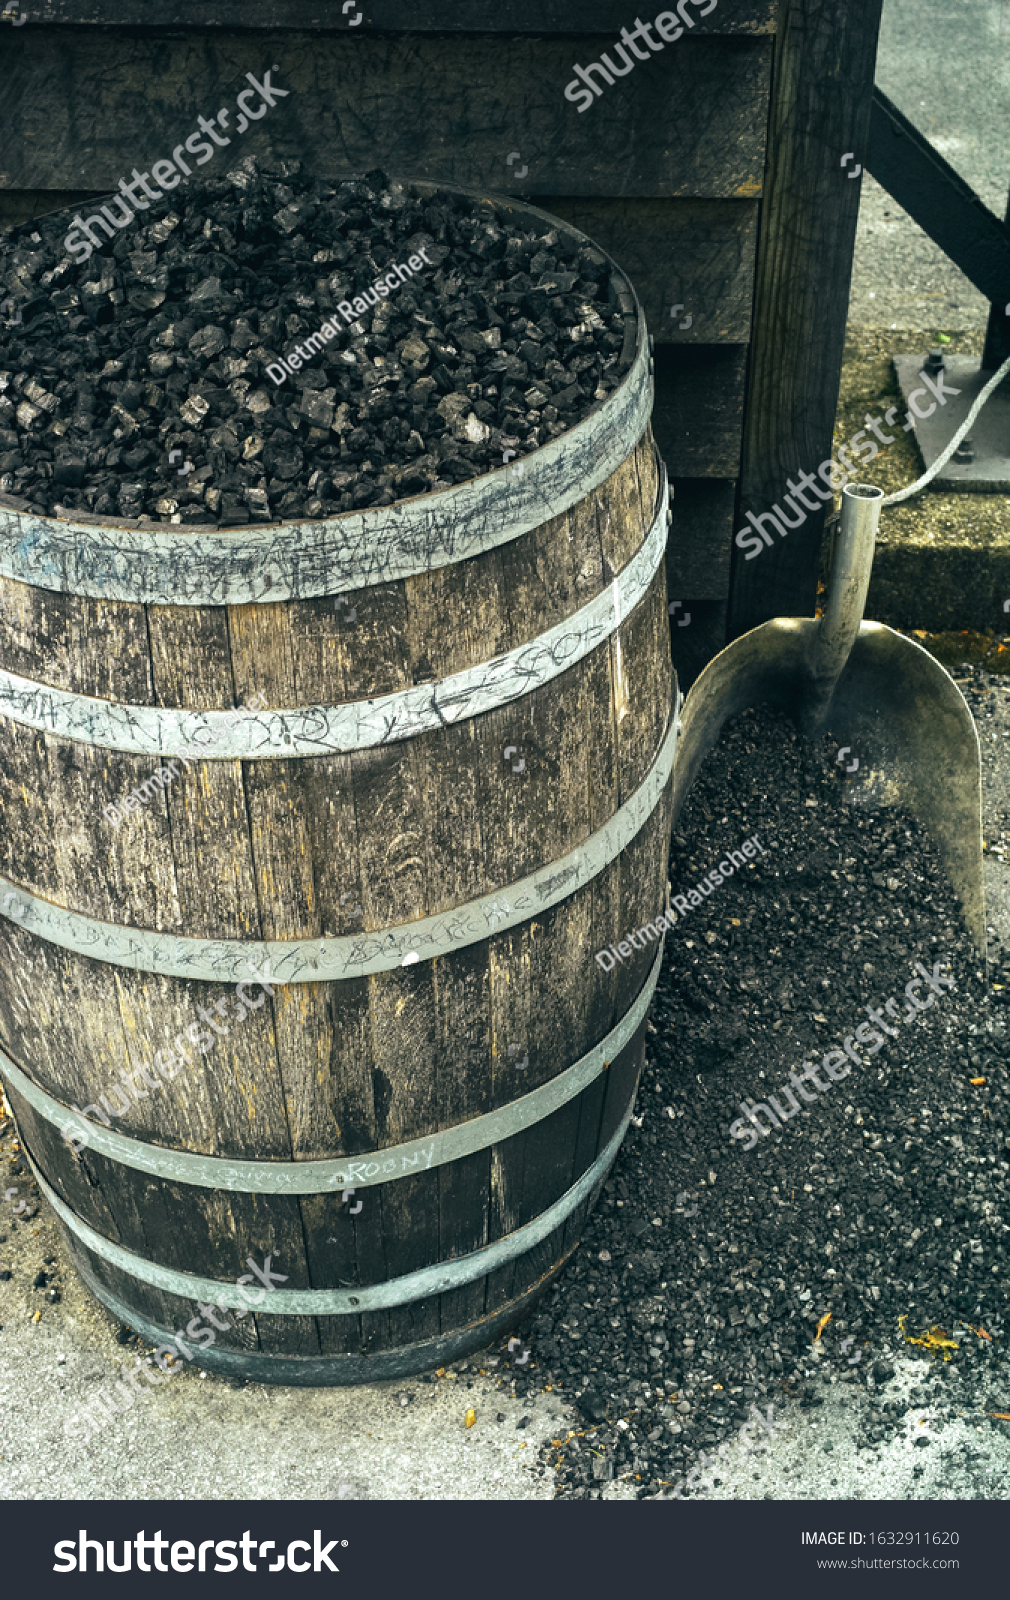 Charcoal in a Barrel and a Shovel, used for Mellowing Tennessee Whiskey by Filtration #1632911620